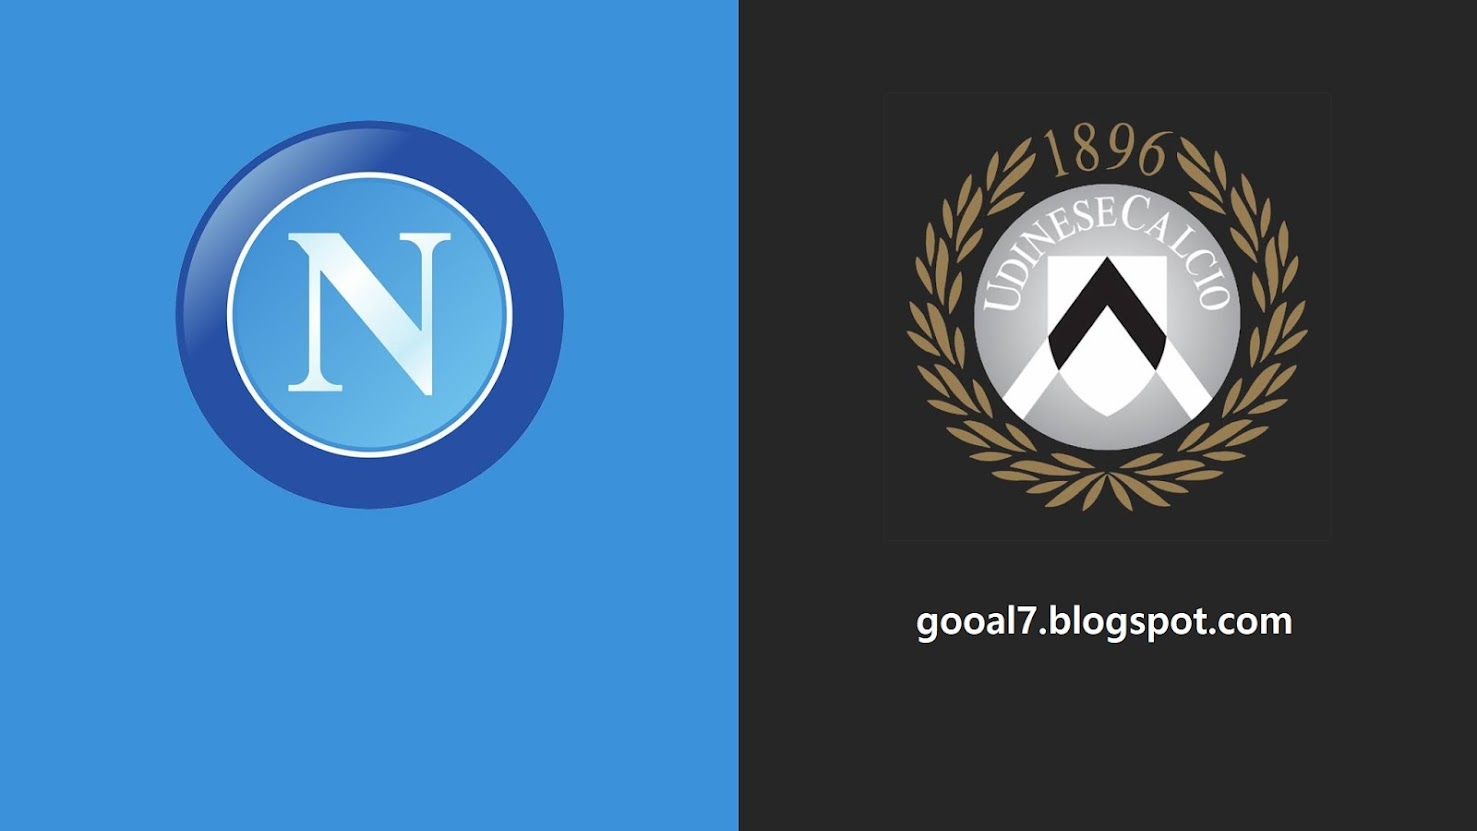 The date for the match between Napoli and Udinese, on 11-05-2021, the Italian League